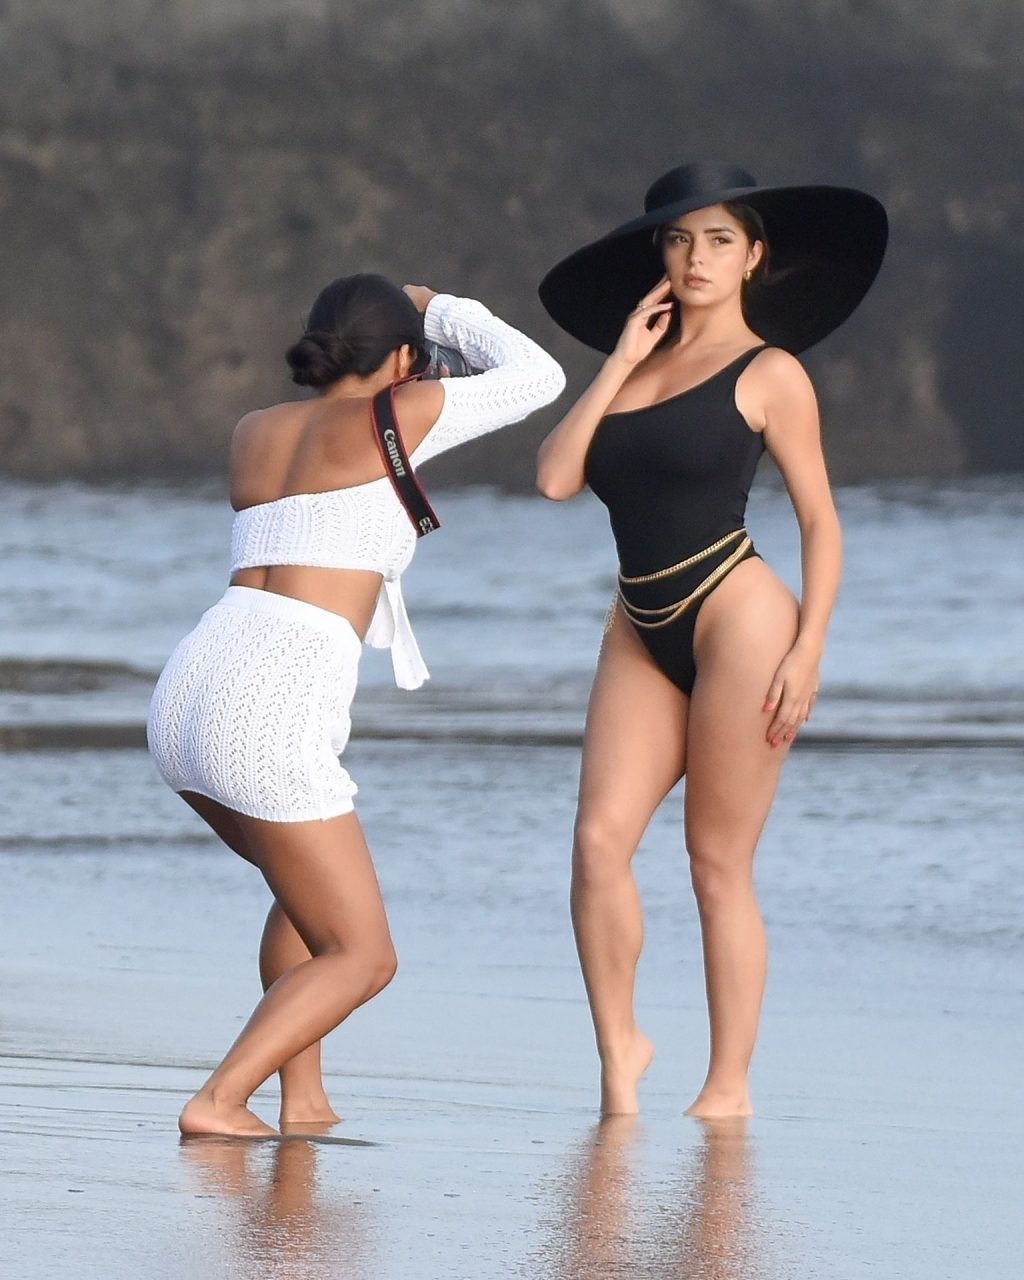 Demi Rose â€“ Spotted on the beach during a photoshoot in Bali Indonesia